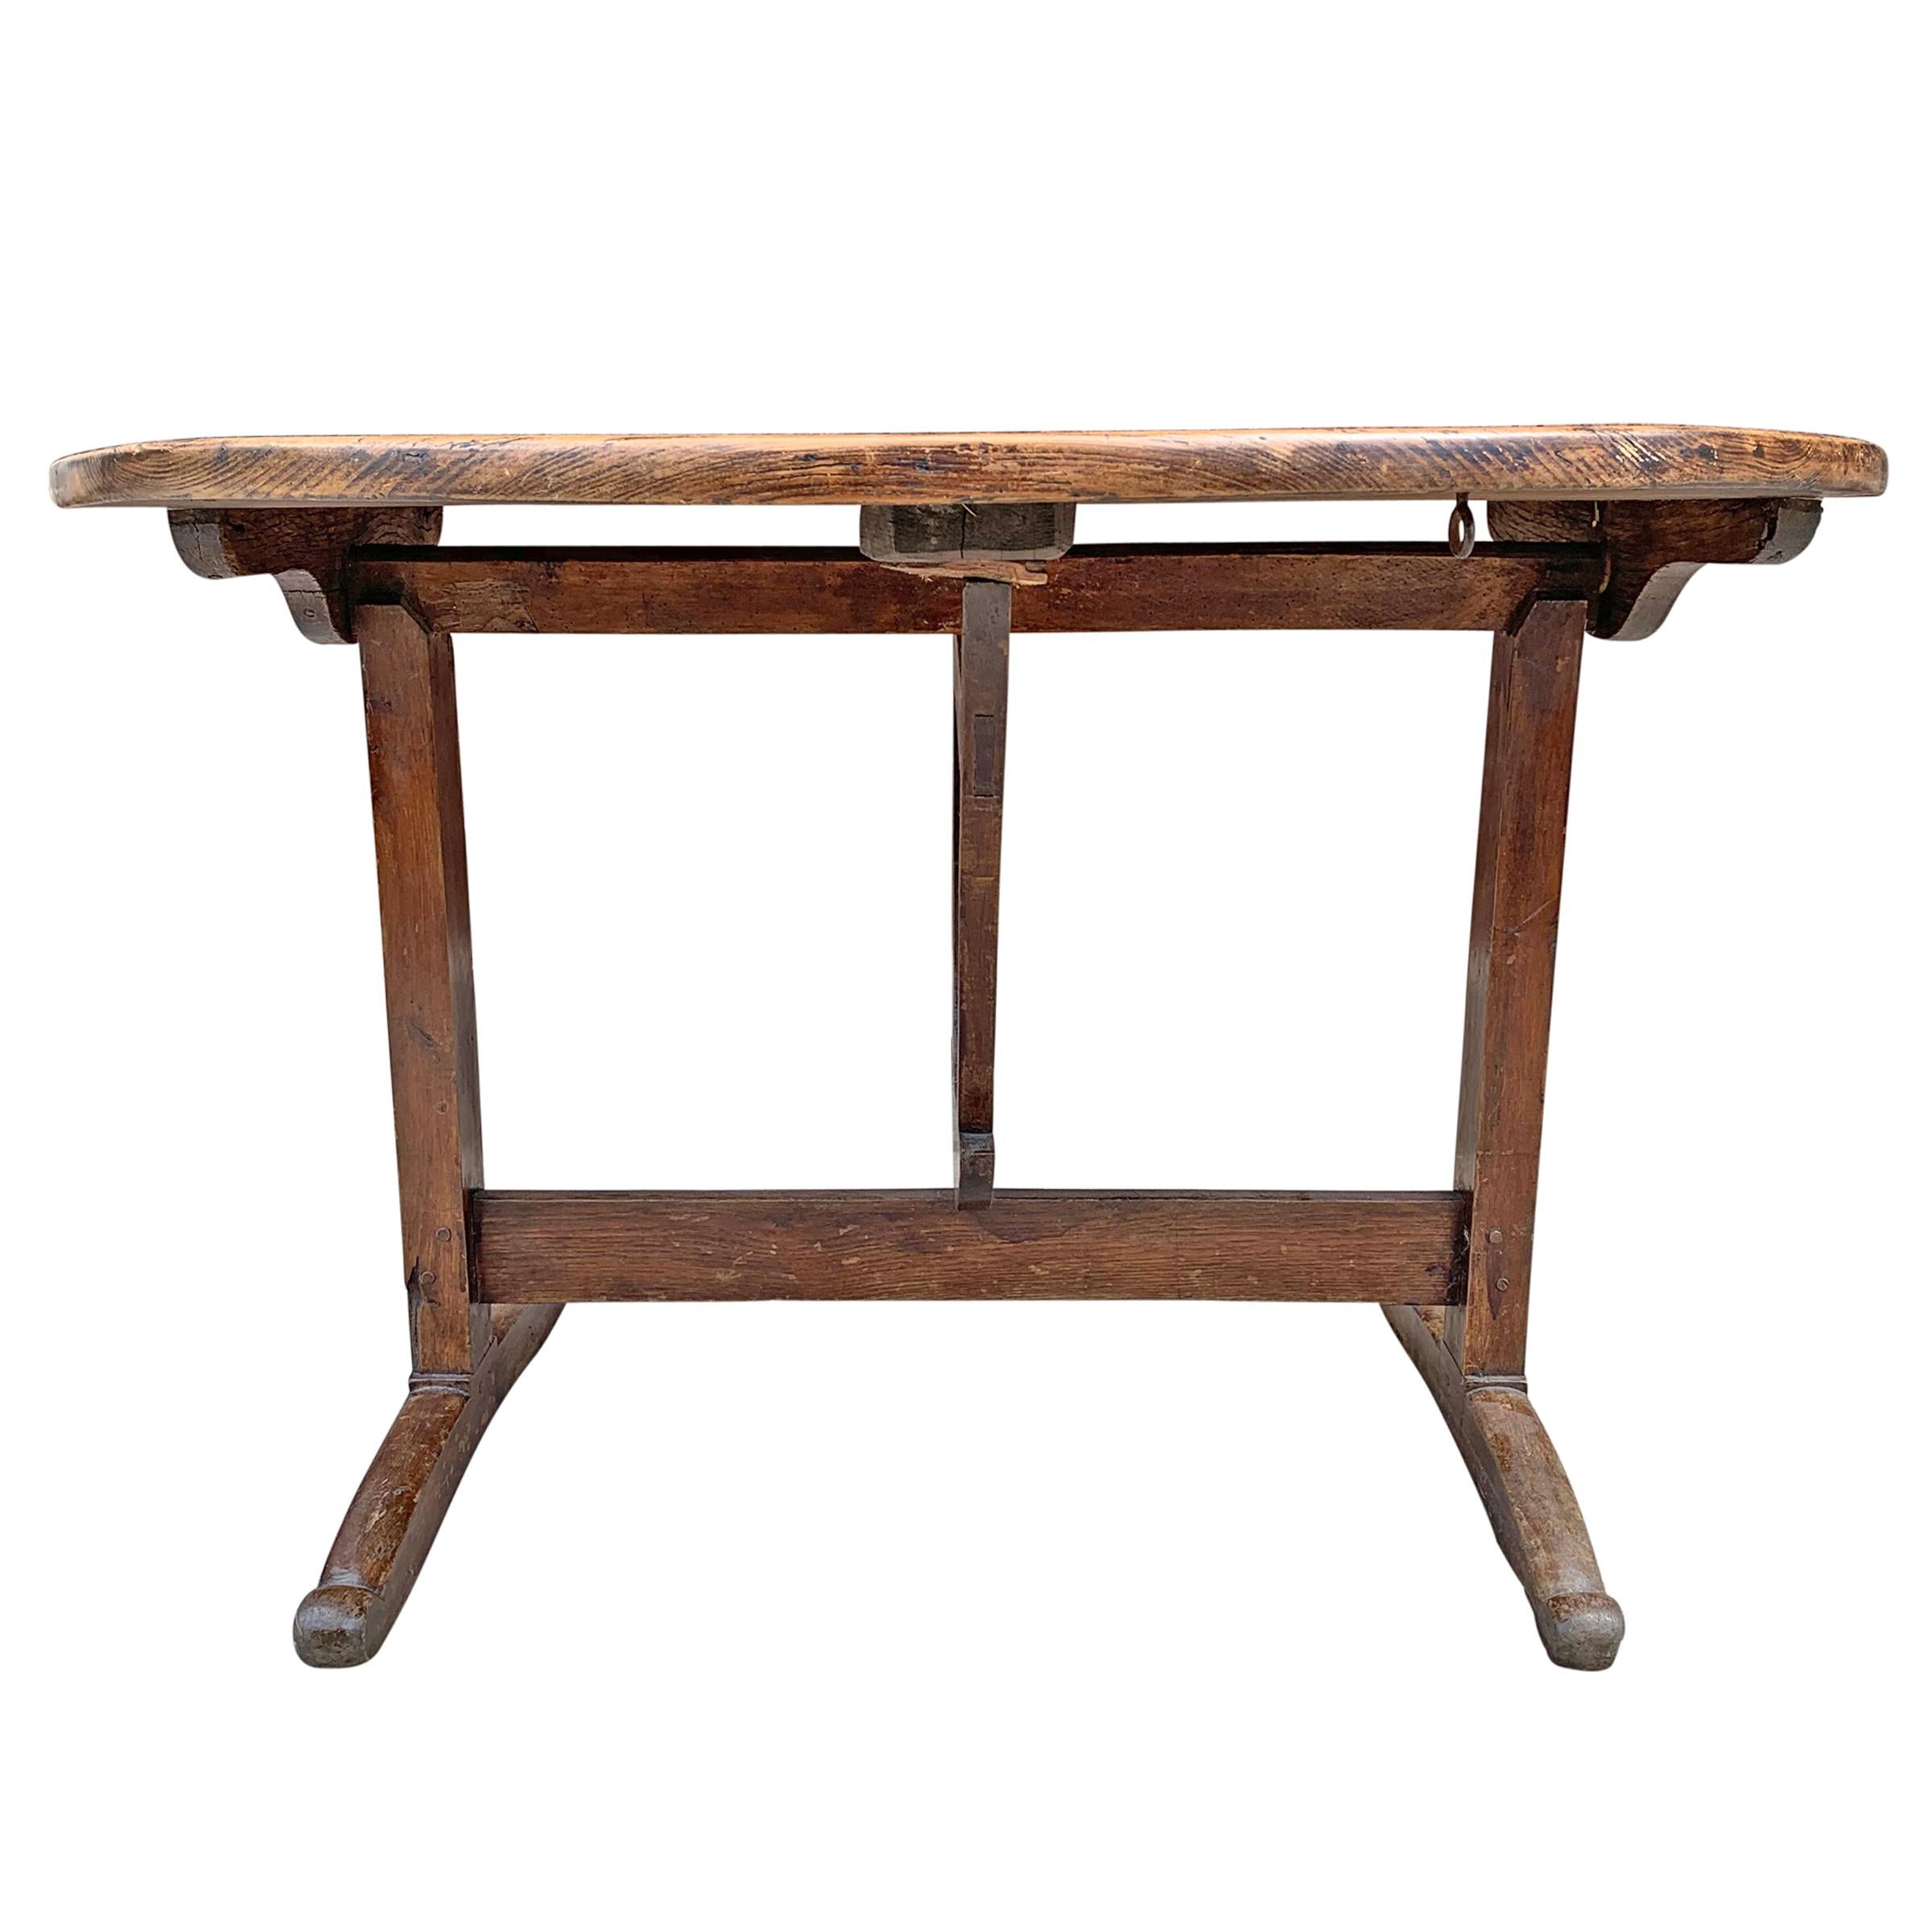 A wonderful 19th century French tilt-top wine tasting table with a beautifully figural pine top with walnut legs and an oak rotating support. Tables like these were historically used on French vineyards for small meals and/or tasting wine, and were